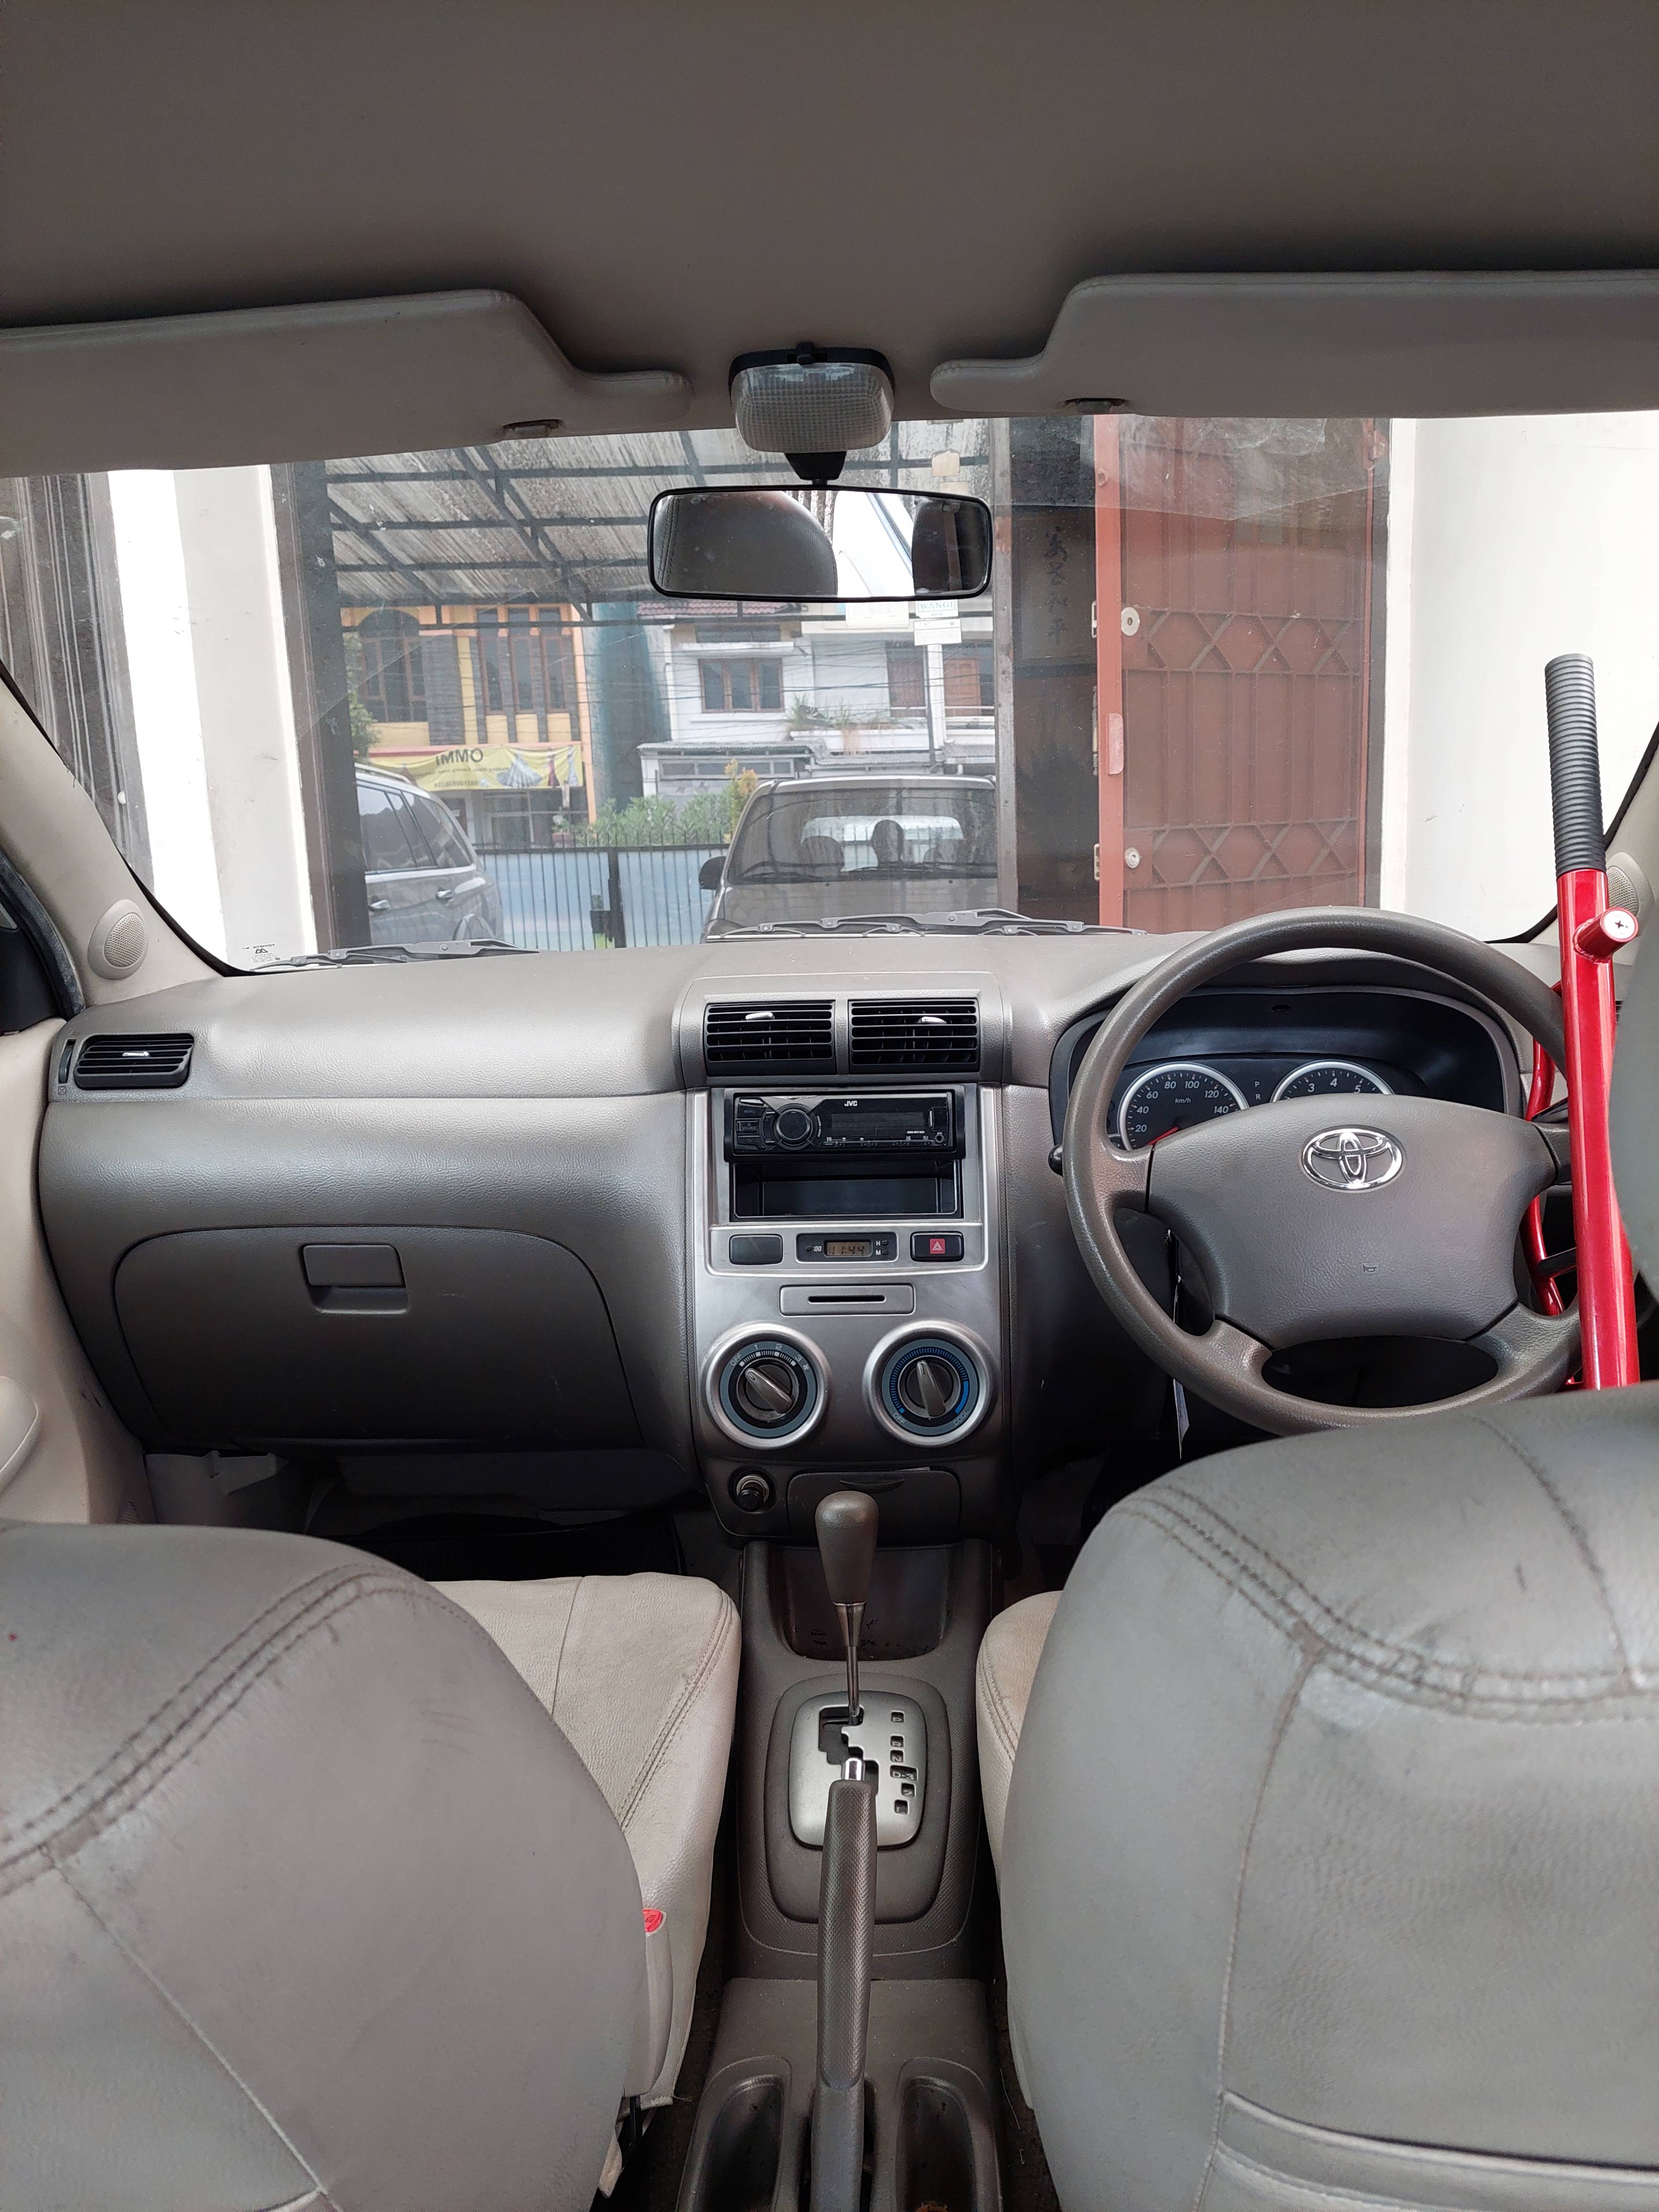 Used 2009 Toyota Avanza  1.5 S MT 1.5 S MT for sale